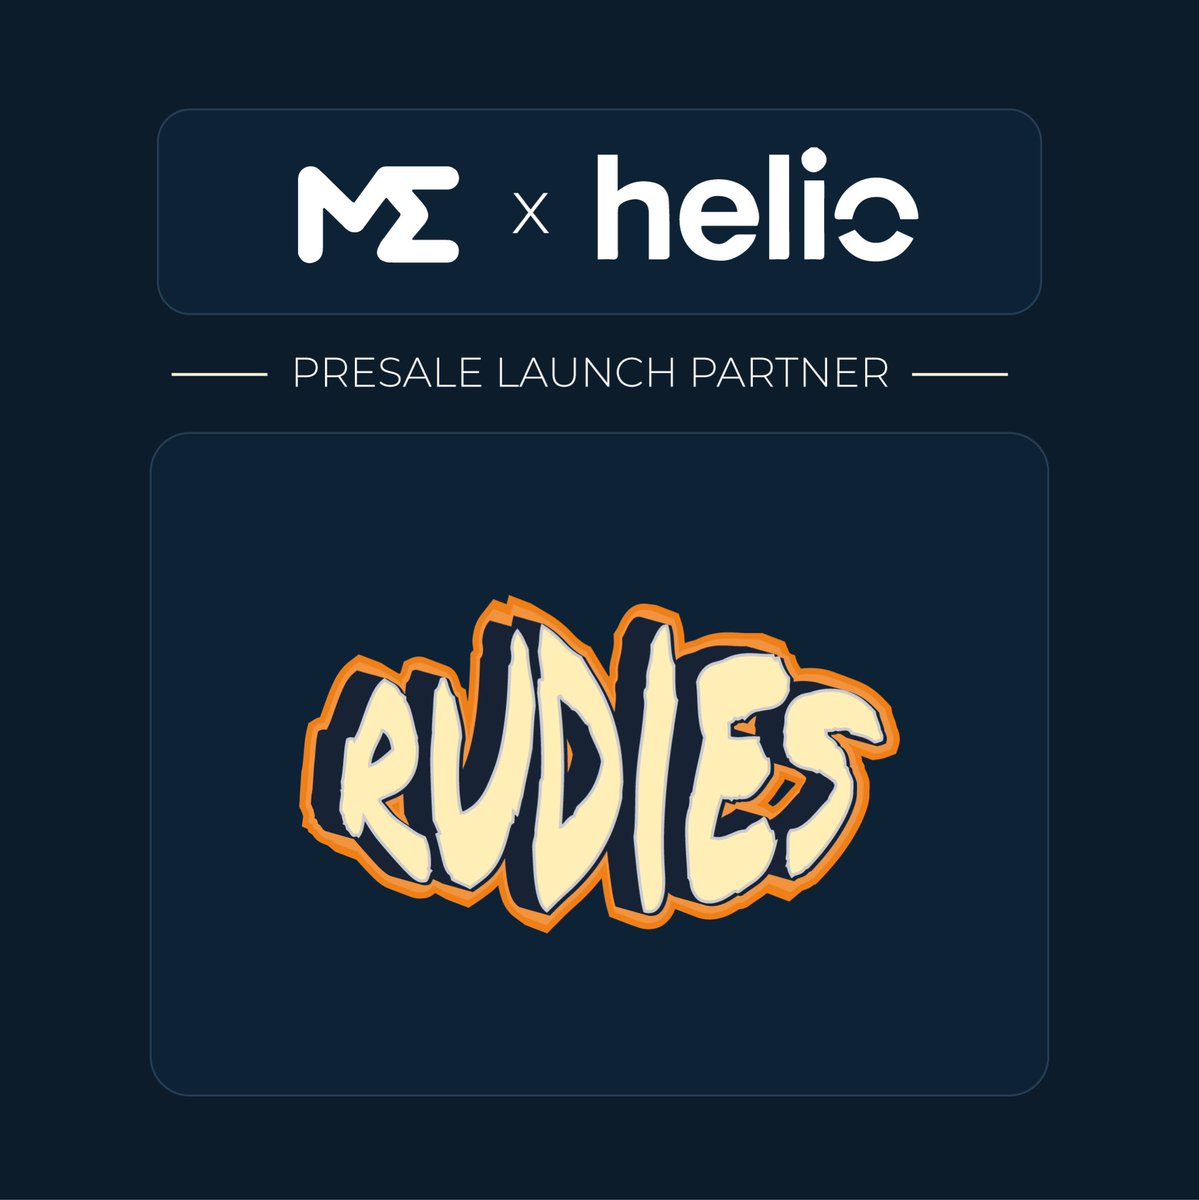 Happy to announce our partnership with @helio_pay and @MagicEden to become one of the first participants of their new presale platform.